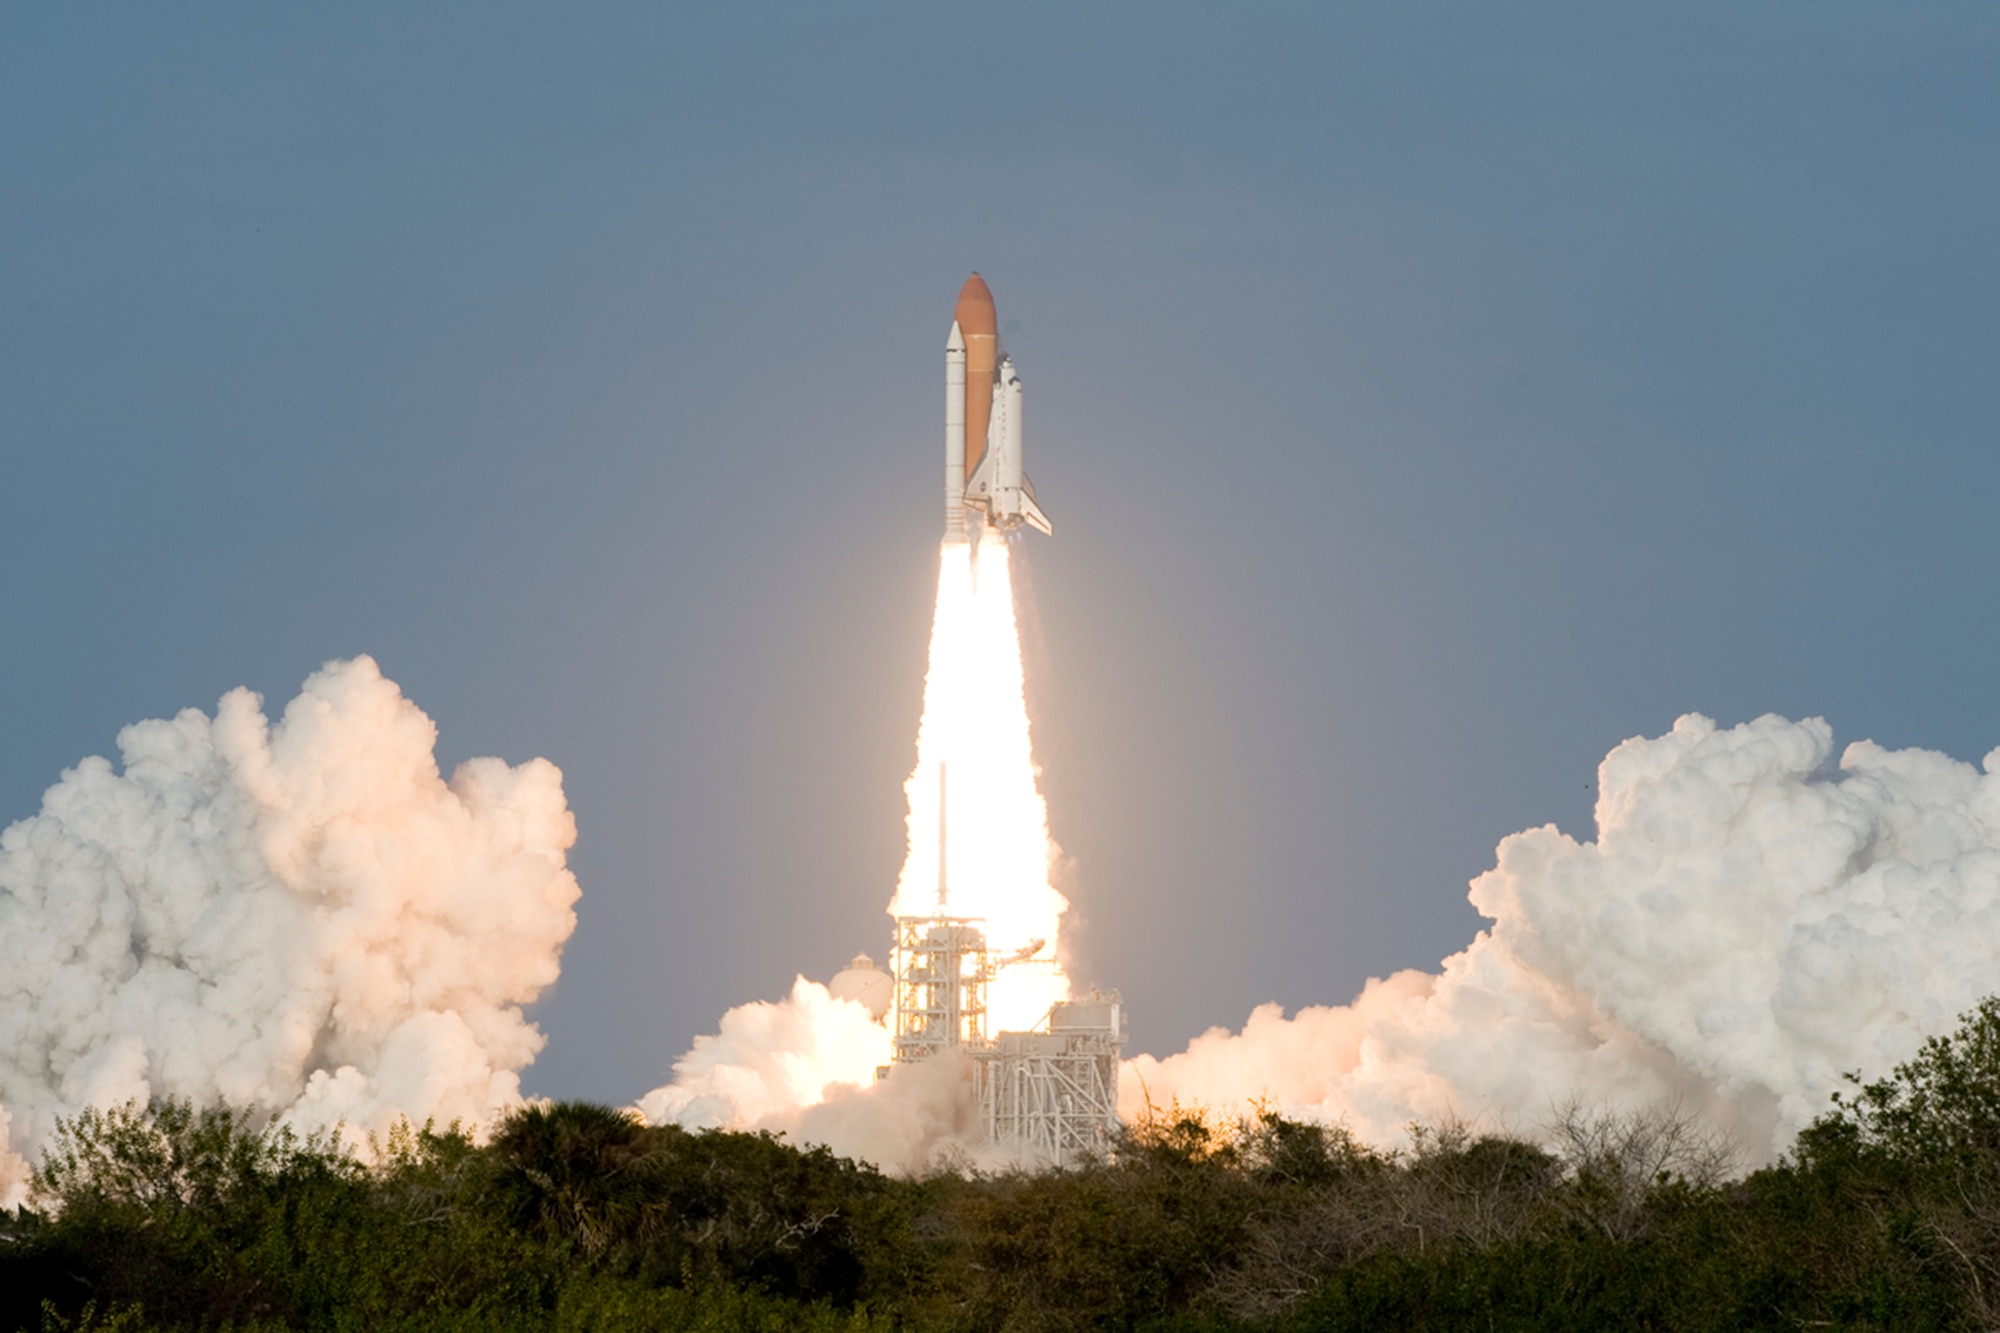 The Space Shuttle Discovery lifts off from the Kennedy Space Center on its STS-133 mission Feb. 24, 2011.  (U.S. Air Force photo/Jonathan Gibson)